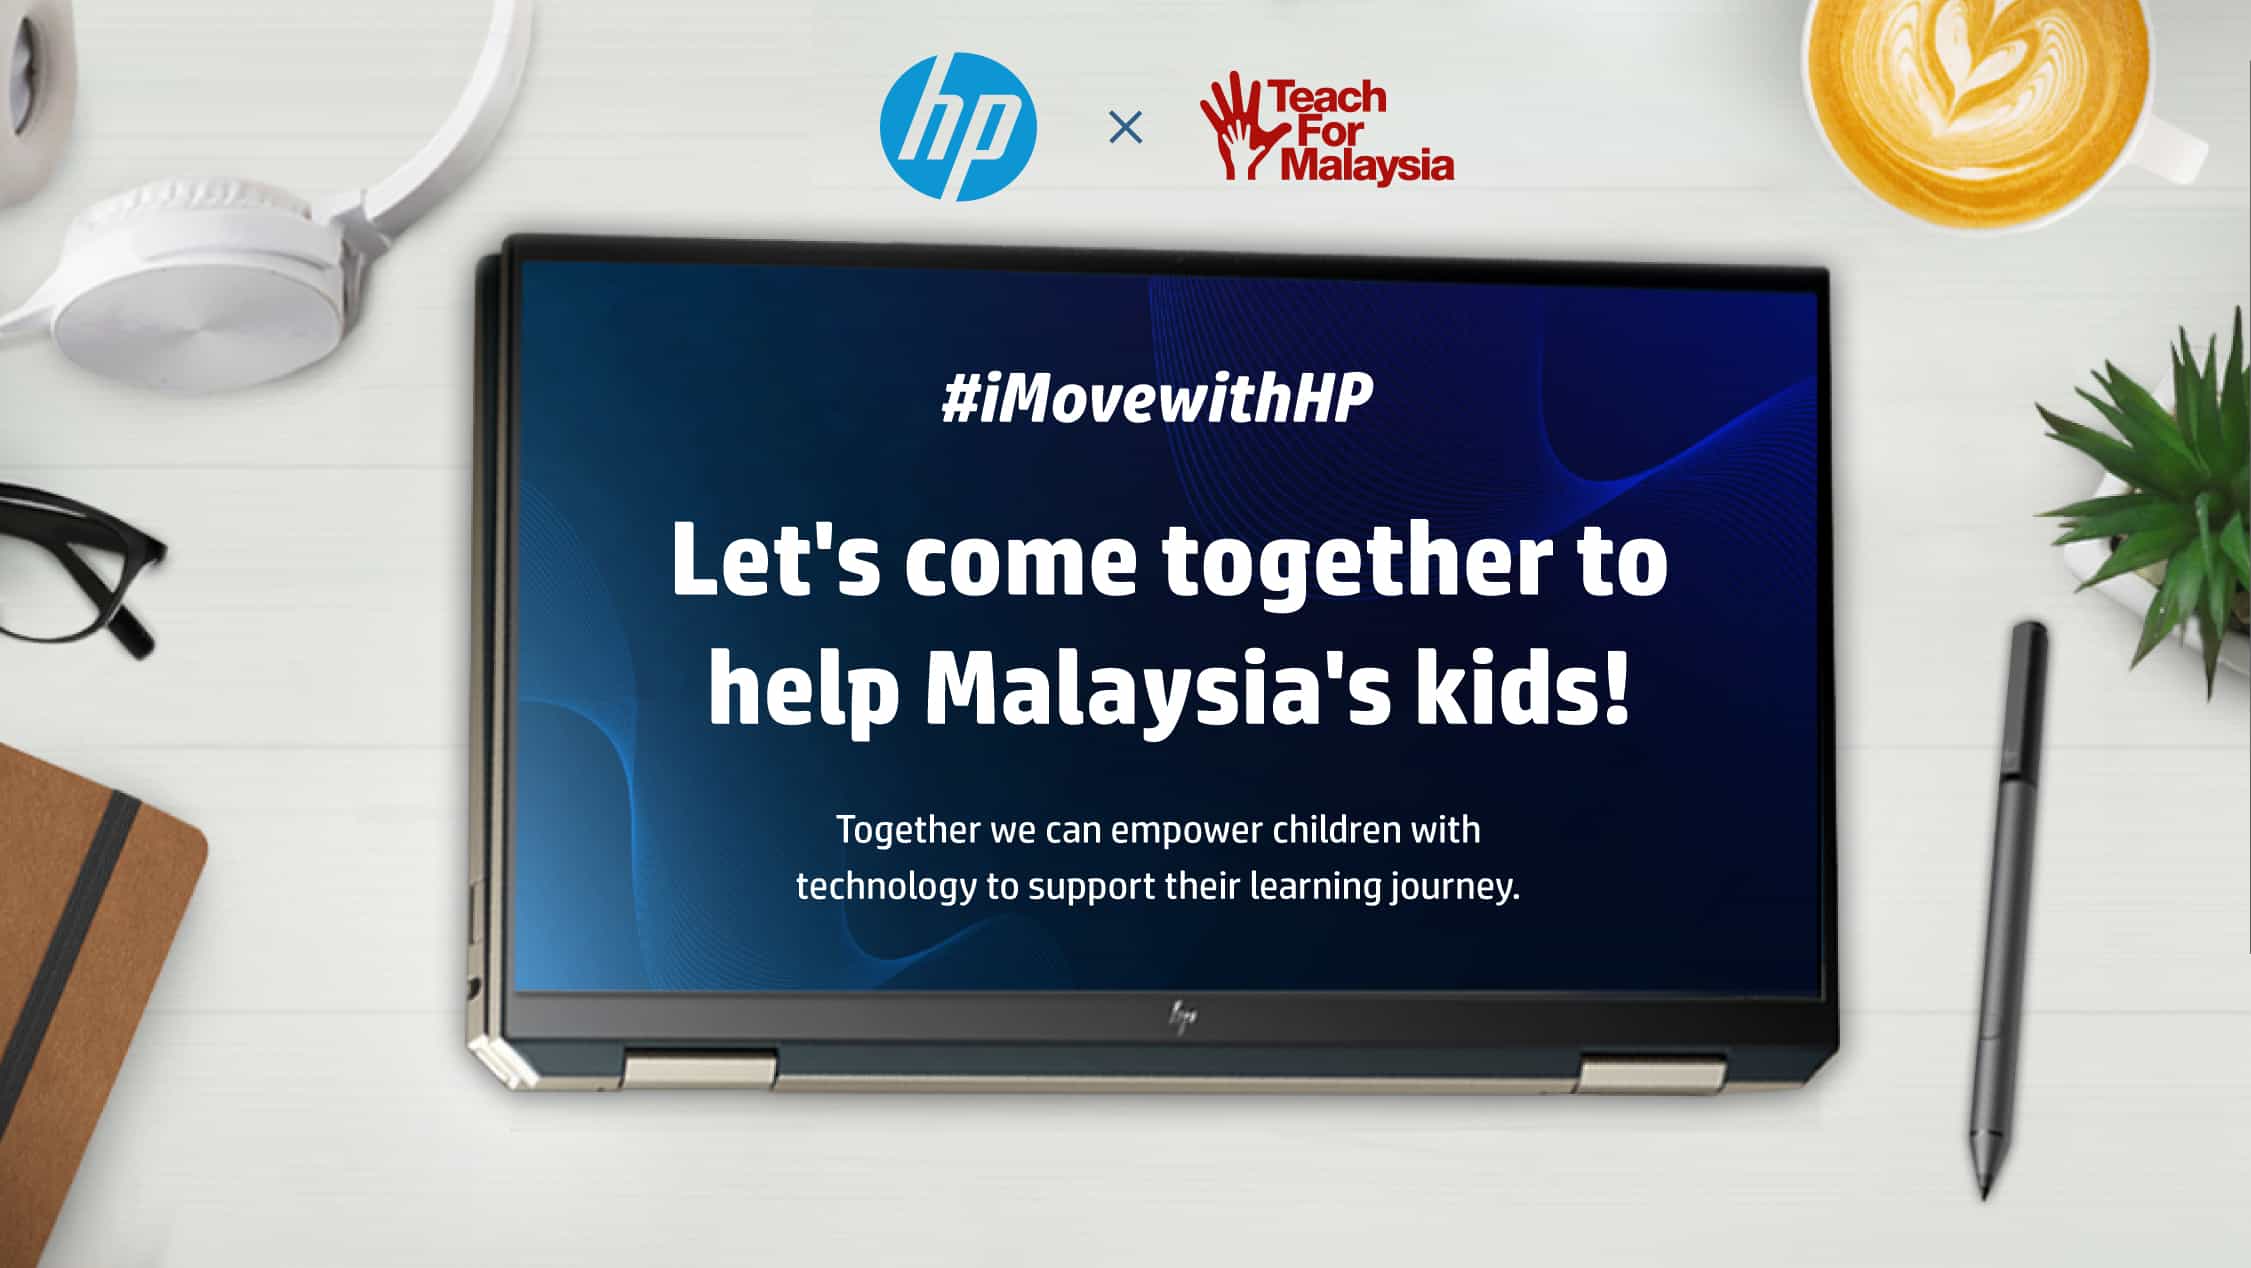 Hp Malaysia And Teach For Malaysia Collaborate To Bring Malaysians Together To Support Learning From Home